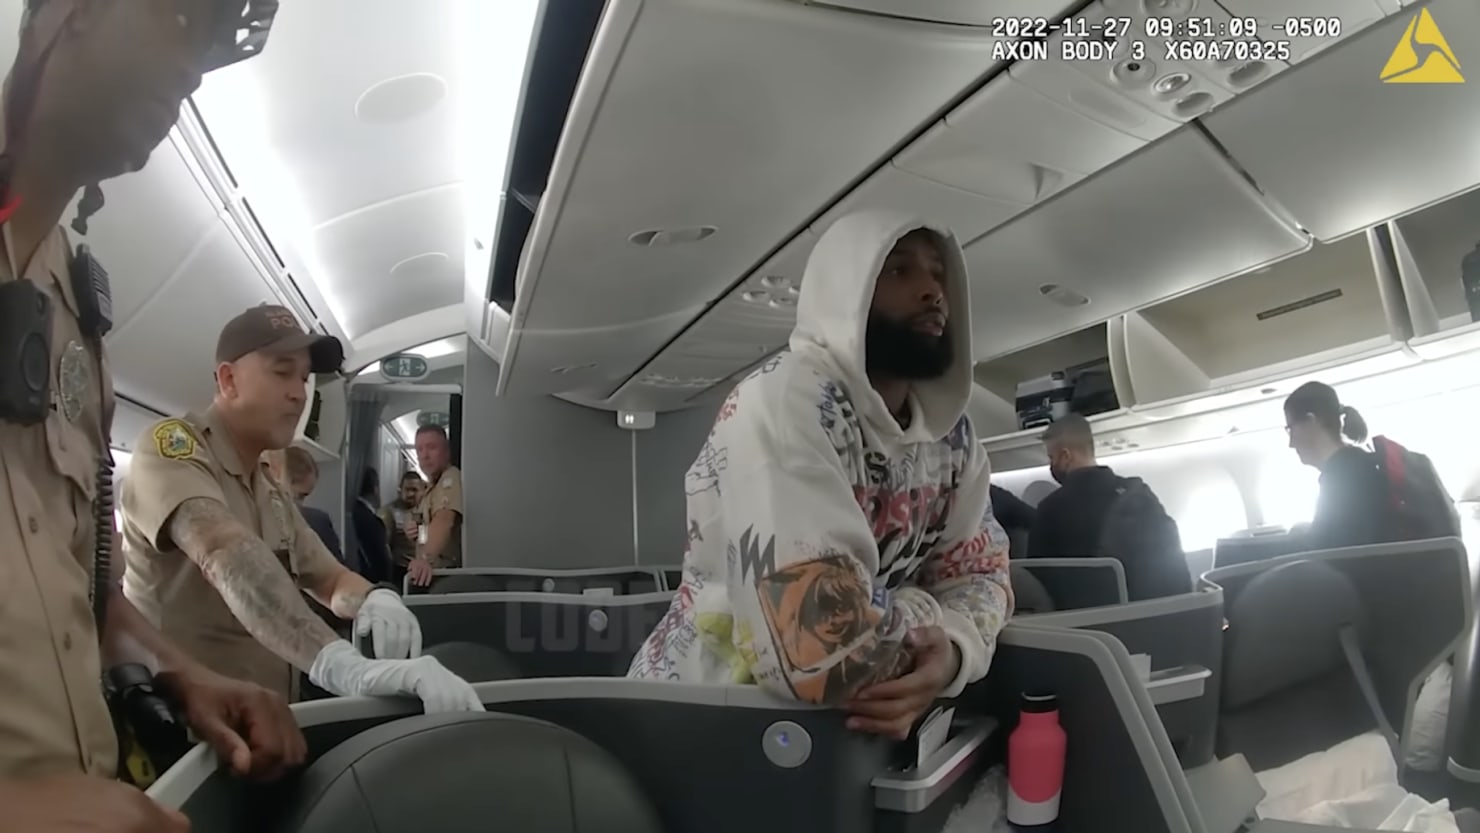 Odell Beckham Jr escorted off plane by police in Miami, calls situation  'comedy hr